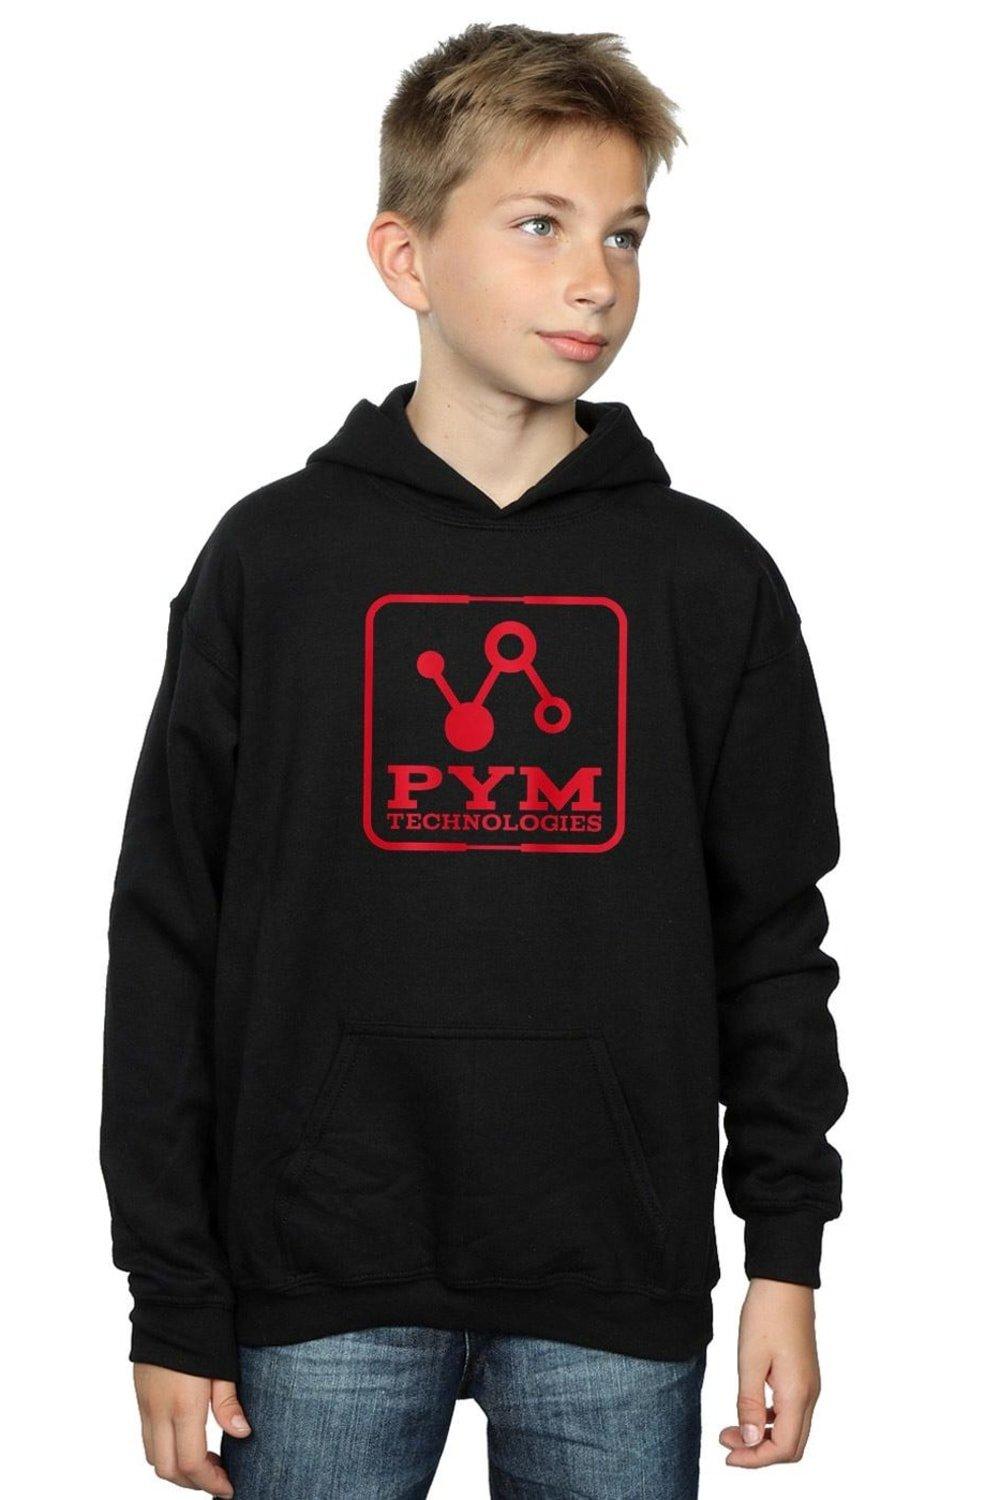 Ant-Man And The Wasp Pym Technologies Hoodie